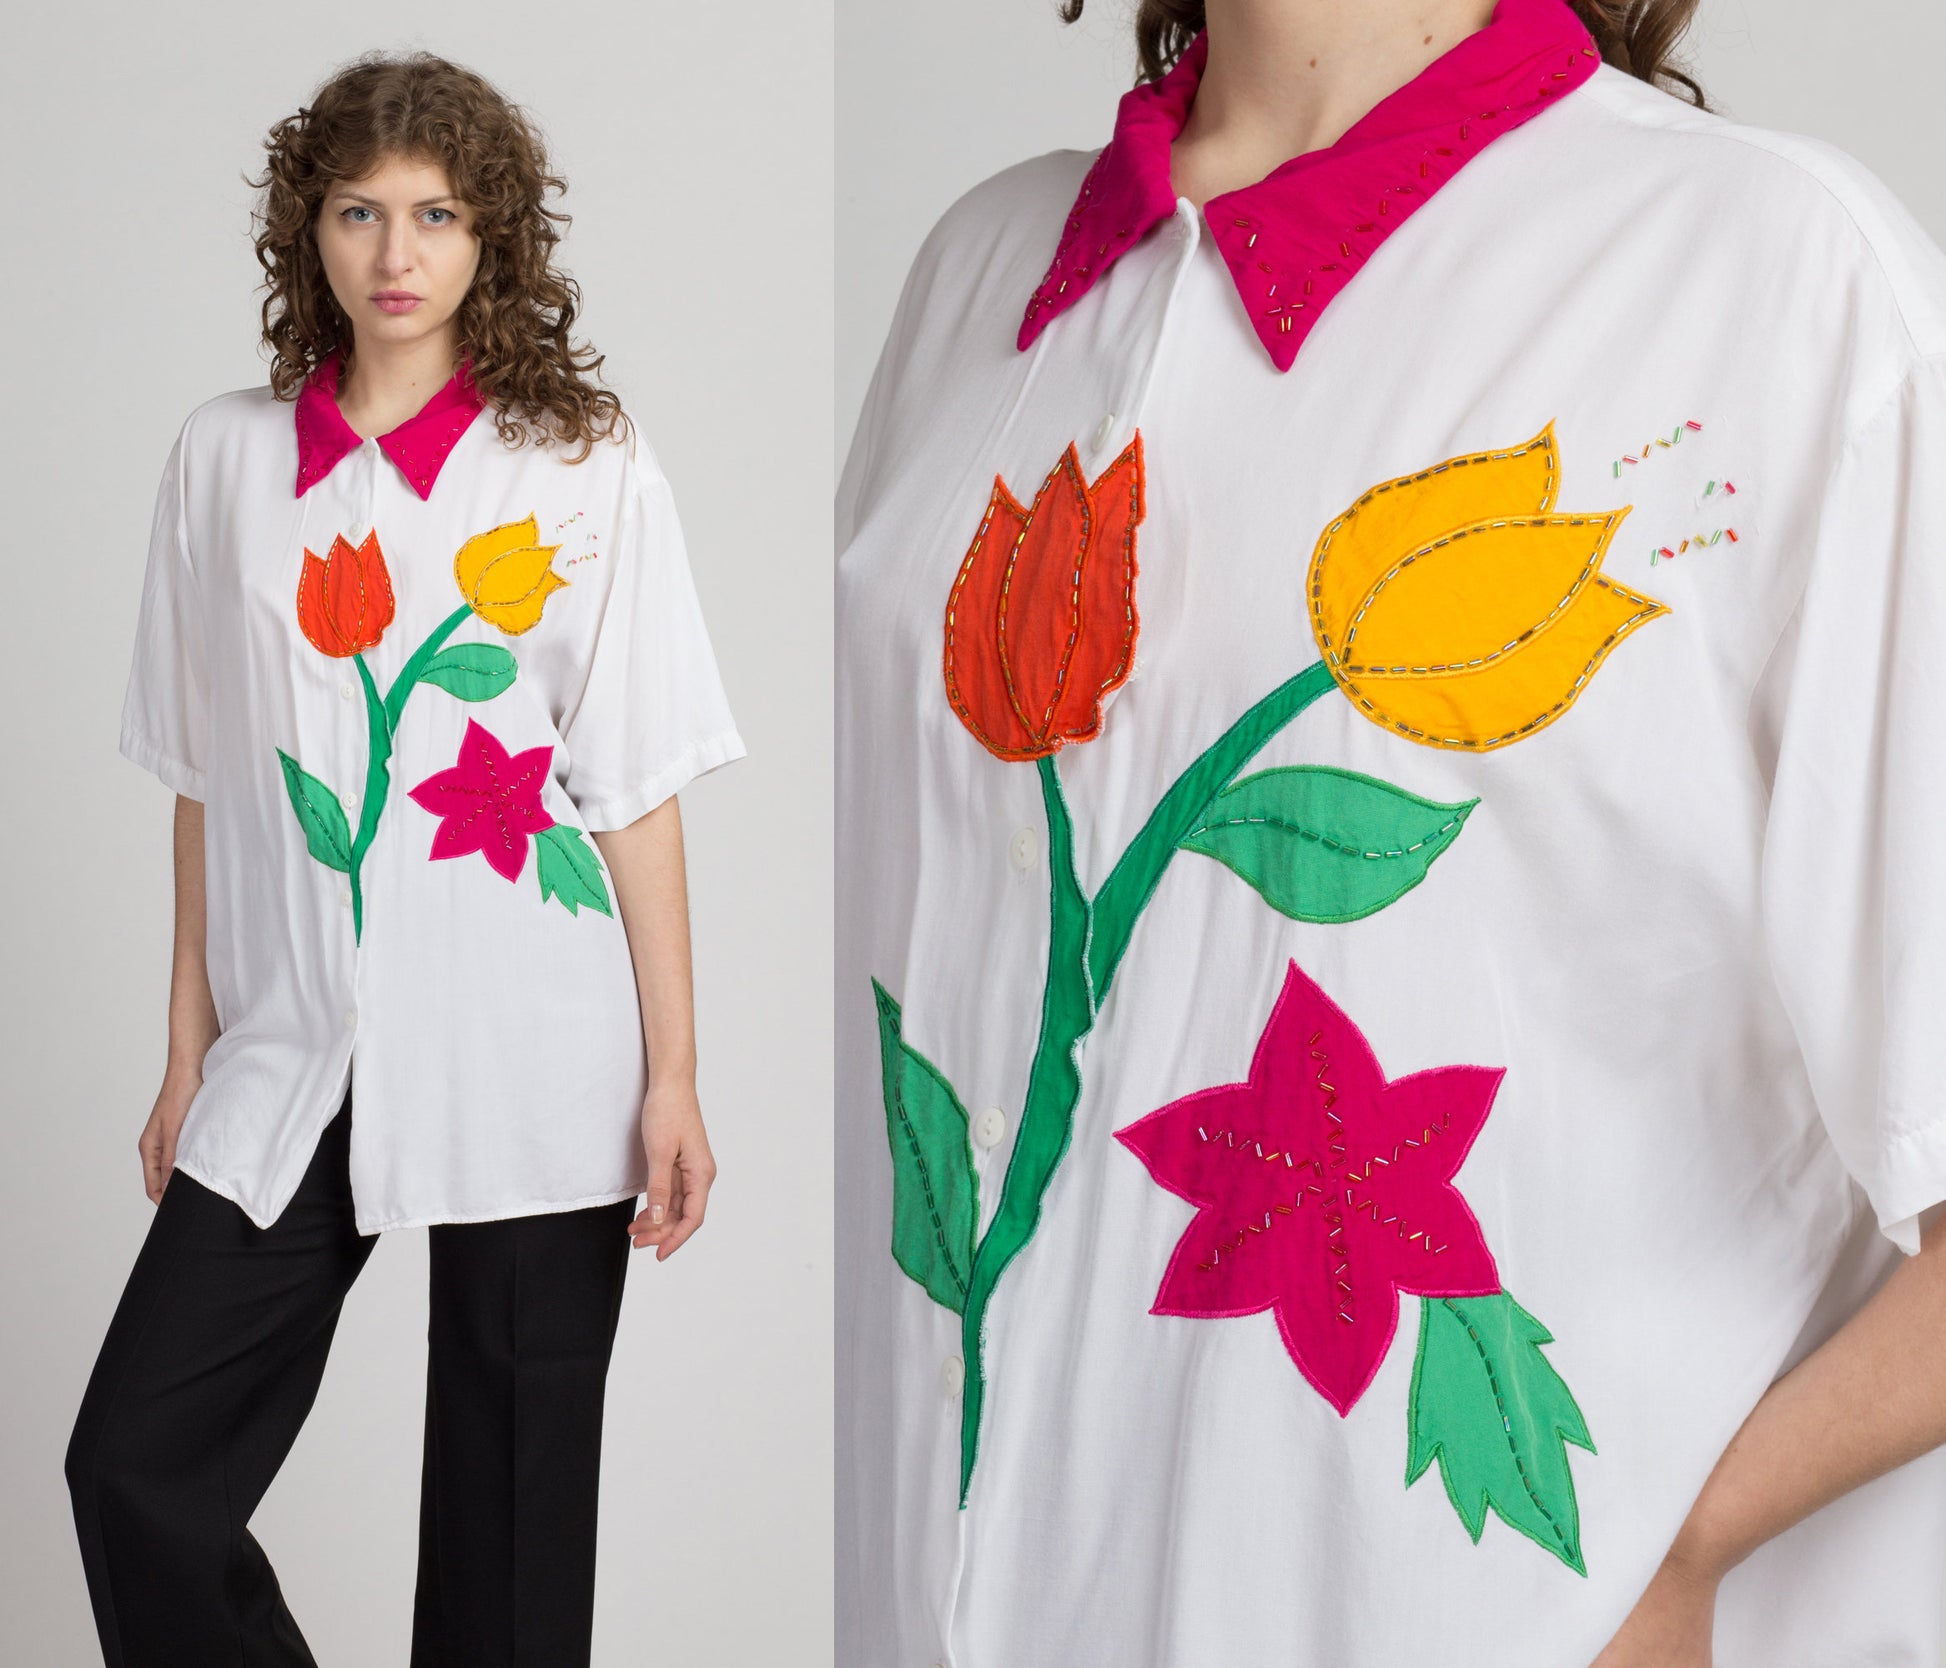 90s Beaded Floral Applique Blouse - 2X | Vintage White Collared Short Sleeve Button Up Novelty Top